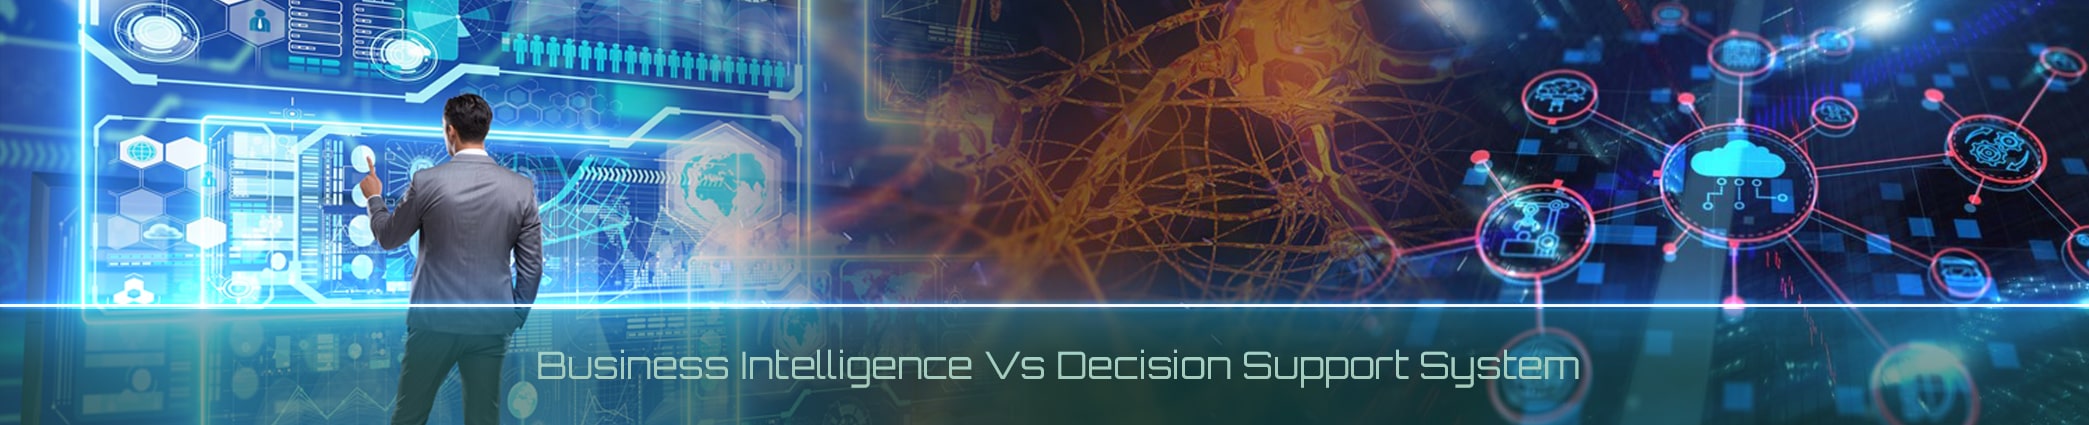 Business Intelligence Vs Decision Support System